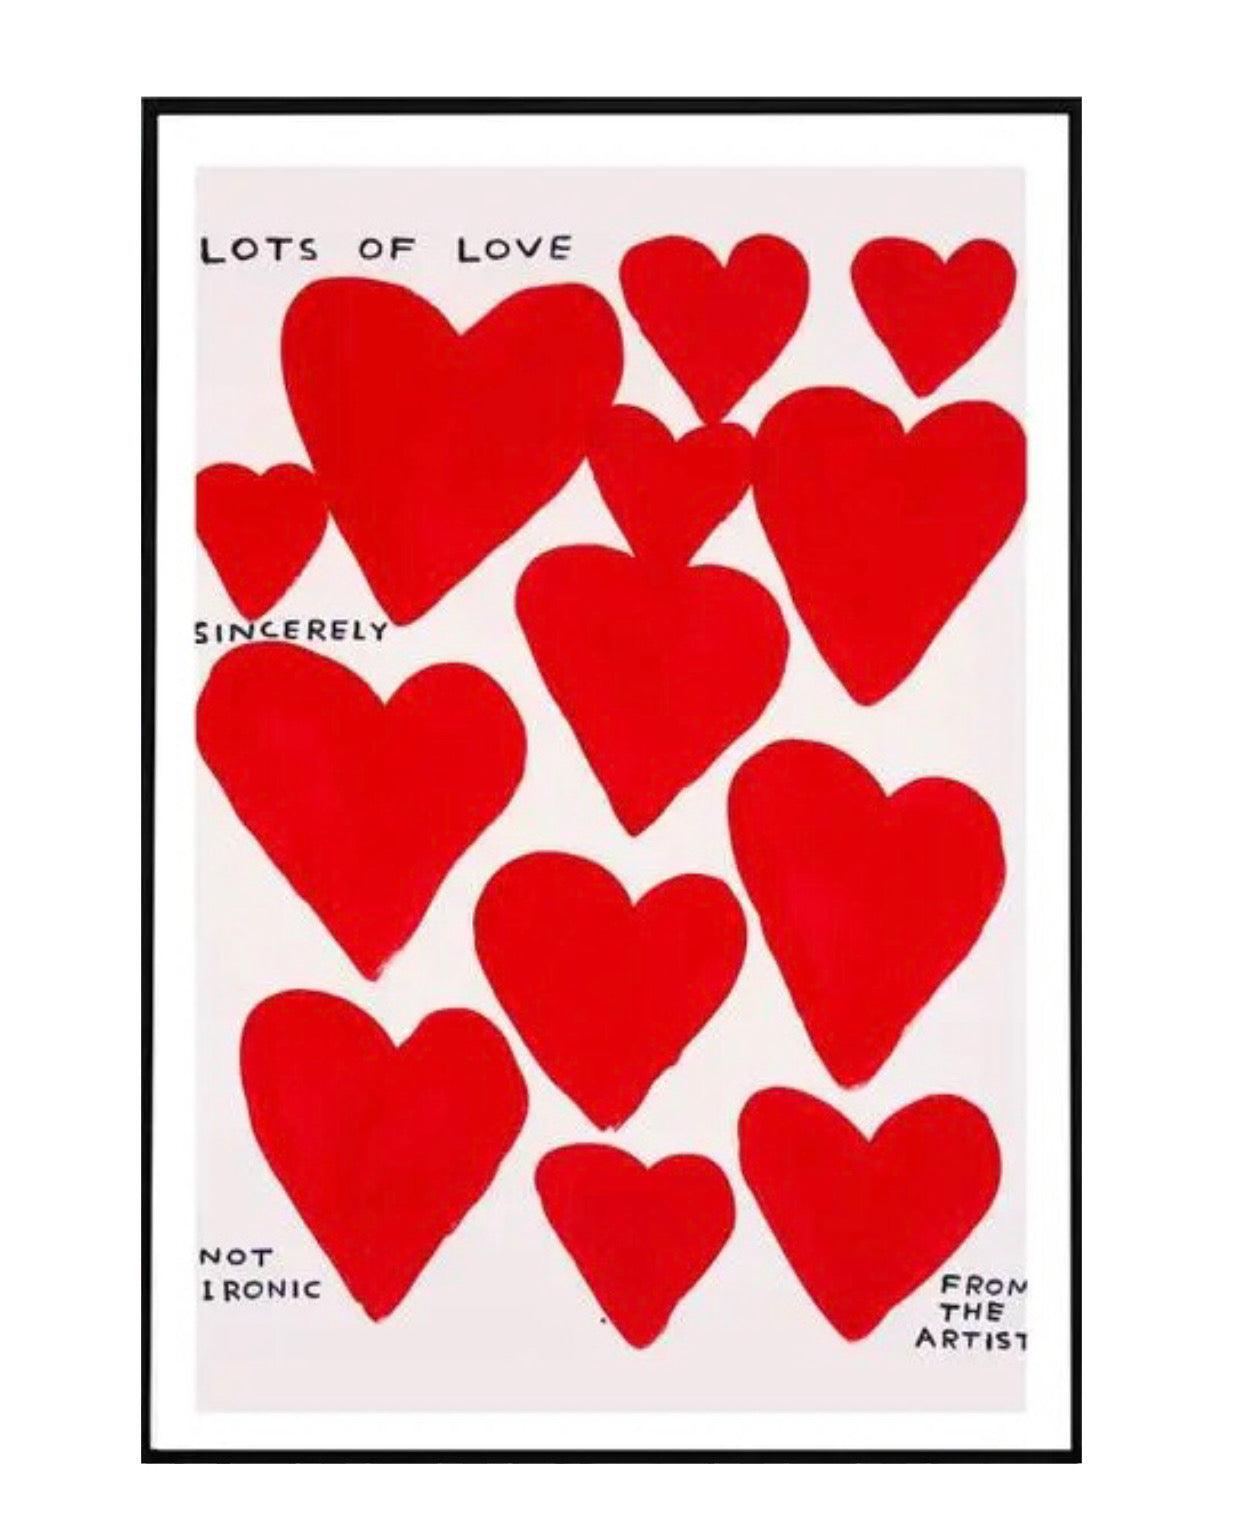 "lots of love from the artist" poster